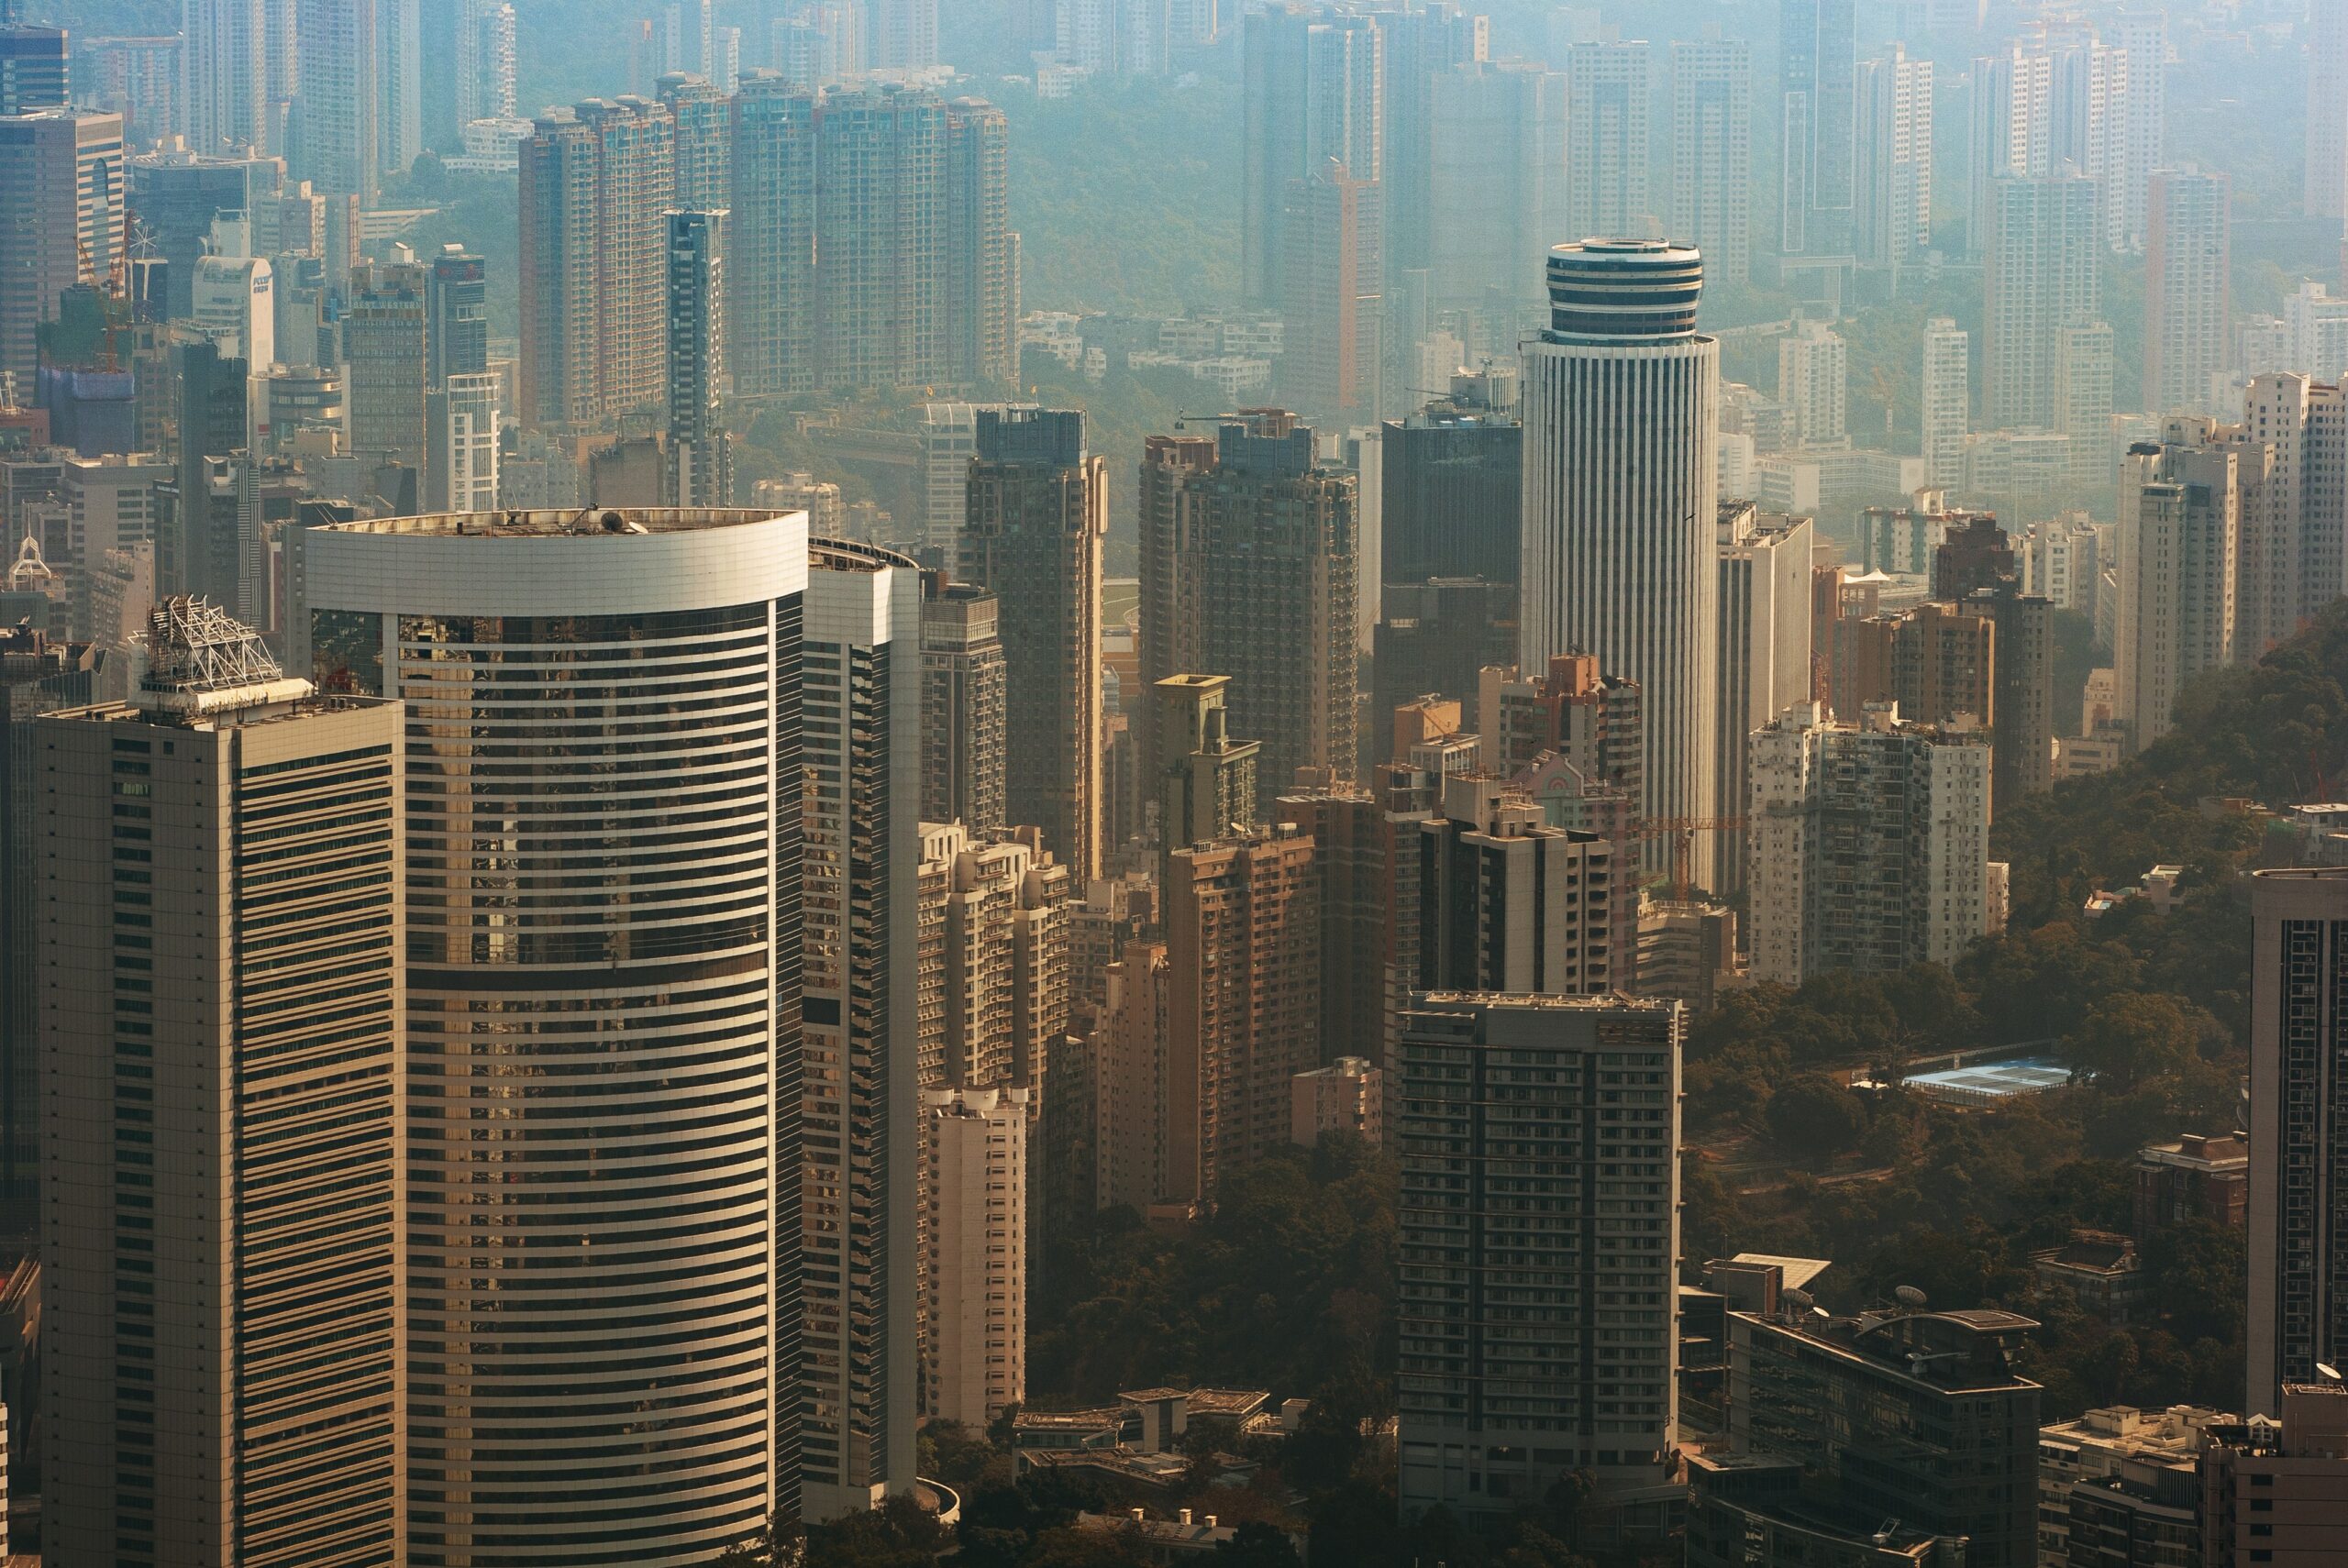 aerial view of hong kong residential towers around a park